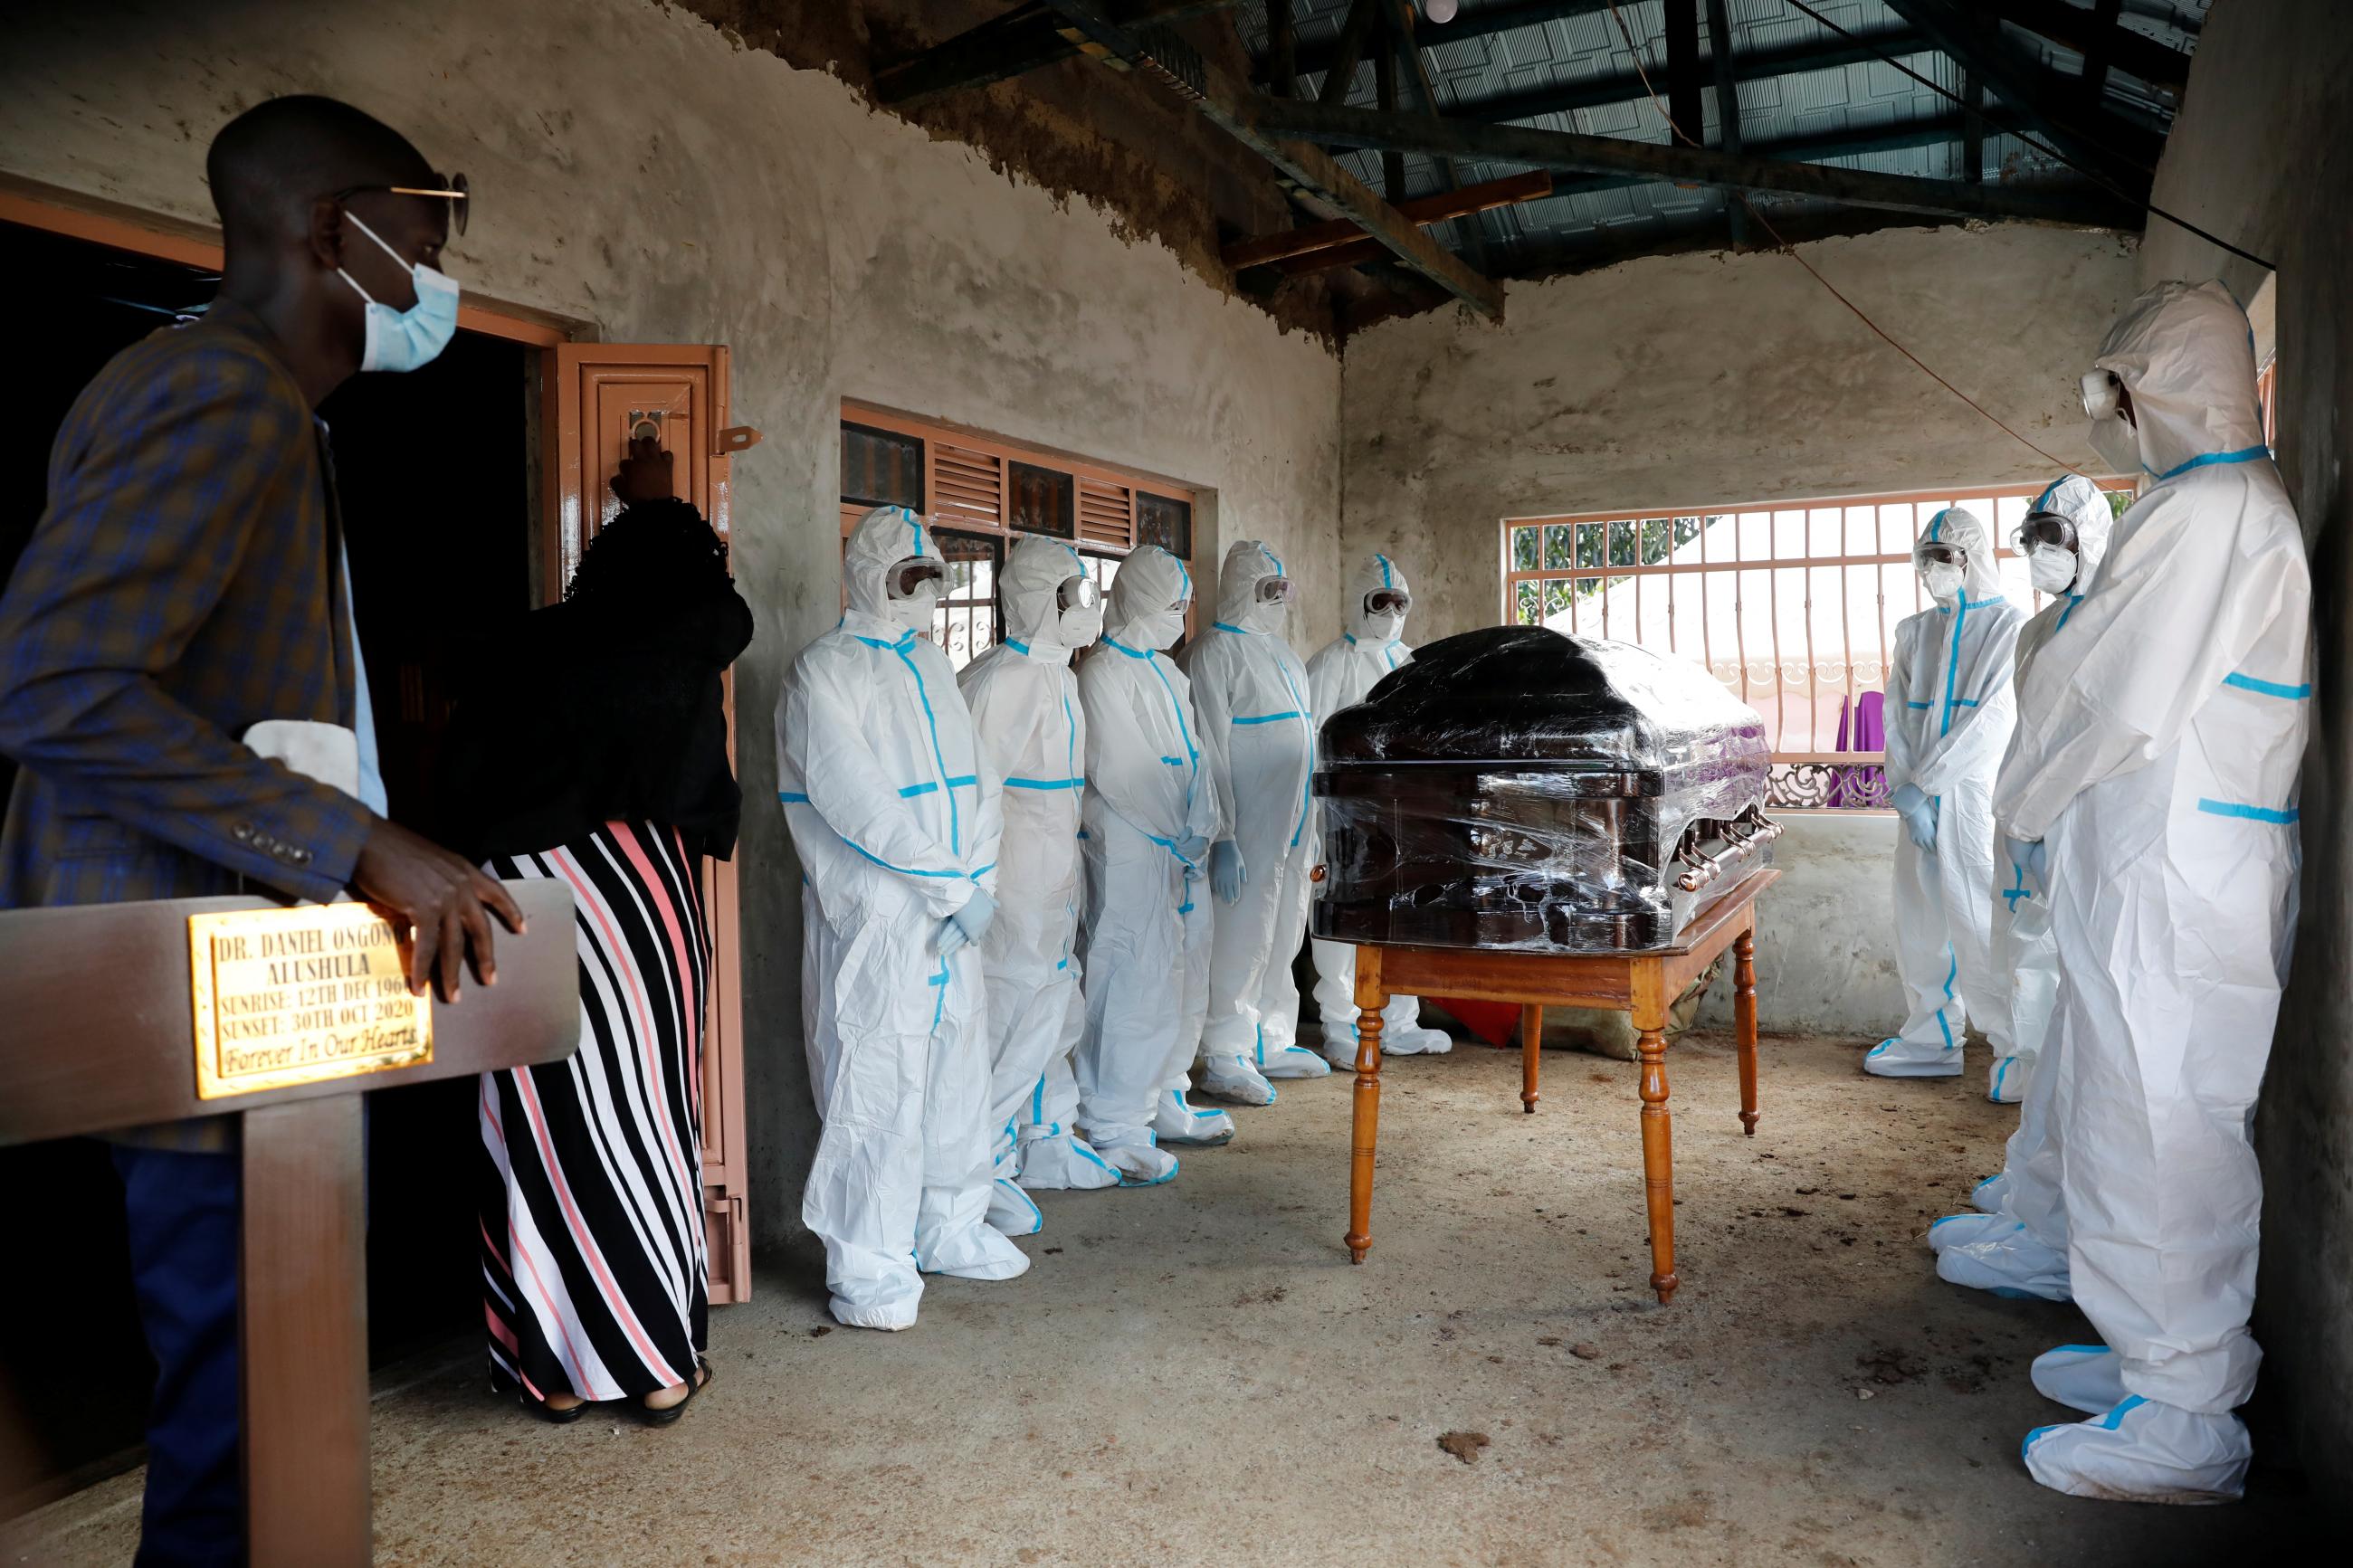 Men dressed in protective suits stand around the coffin of Kenyan doctor Daniel Alushula who died of coronavirus disease (COVID-19), during his funeral in the village of Khumusalaba, in Kakamega county, Kenya November 13, 2020